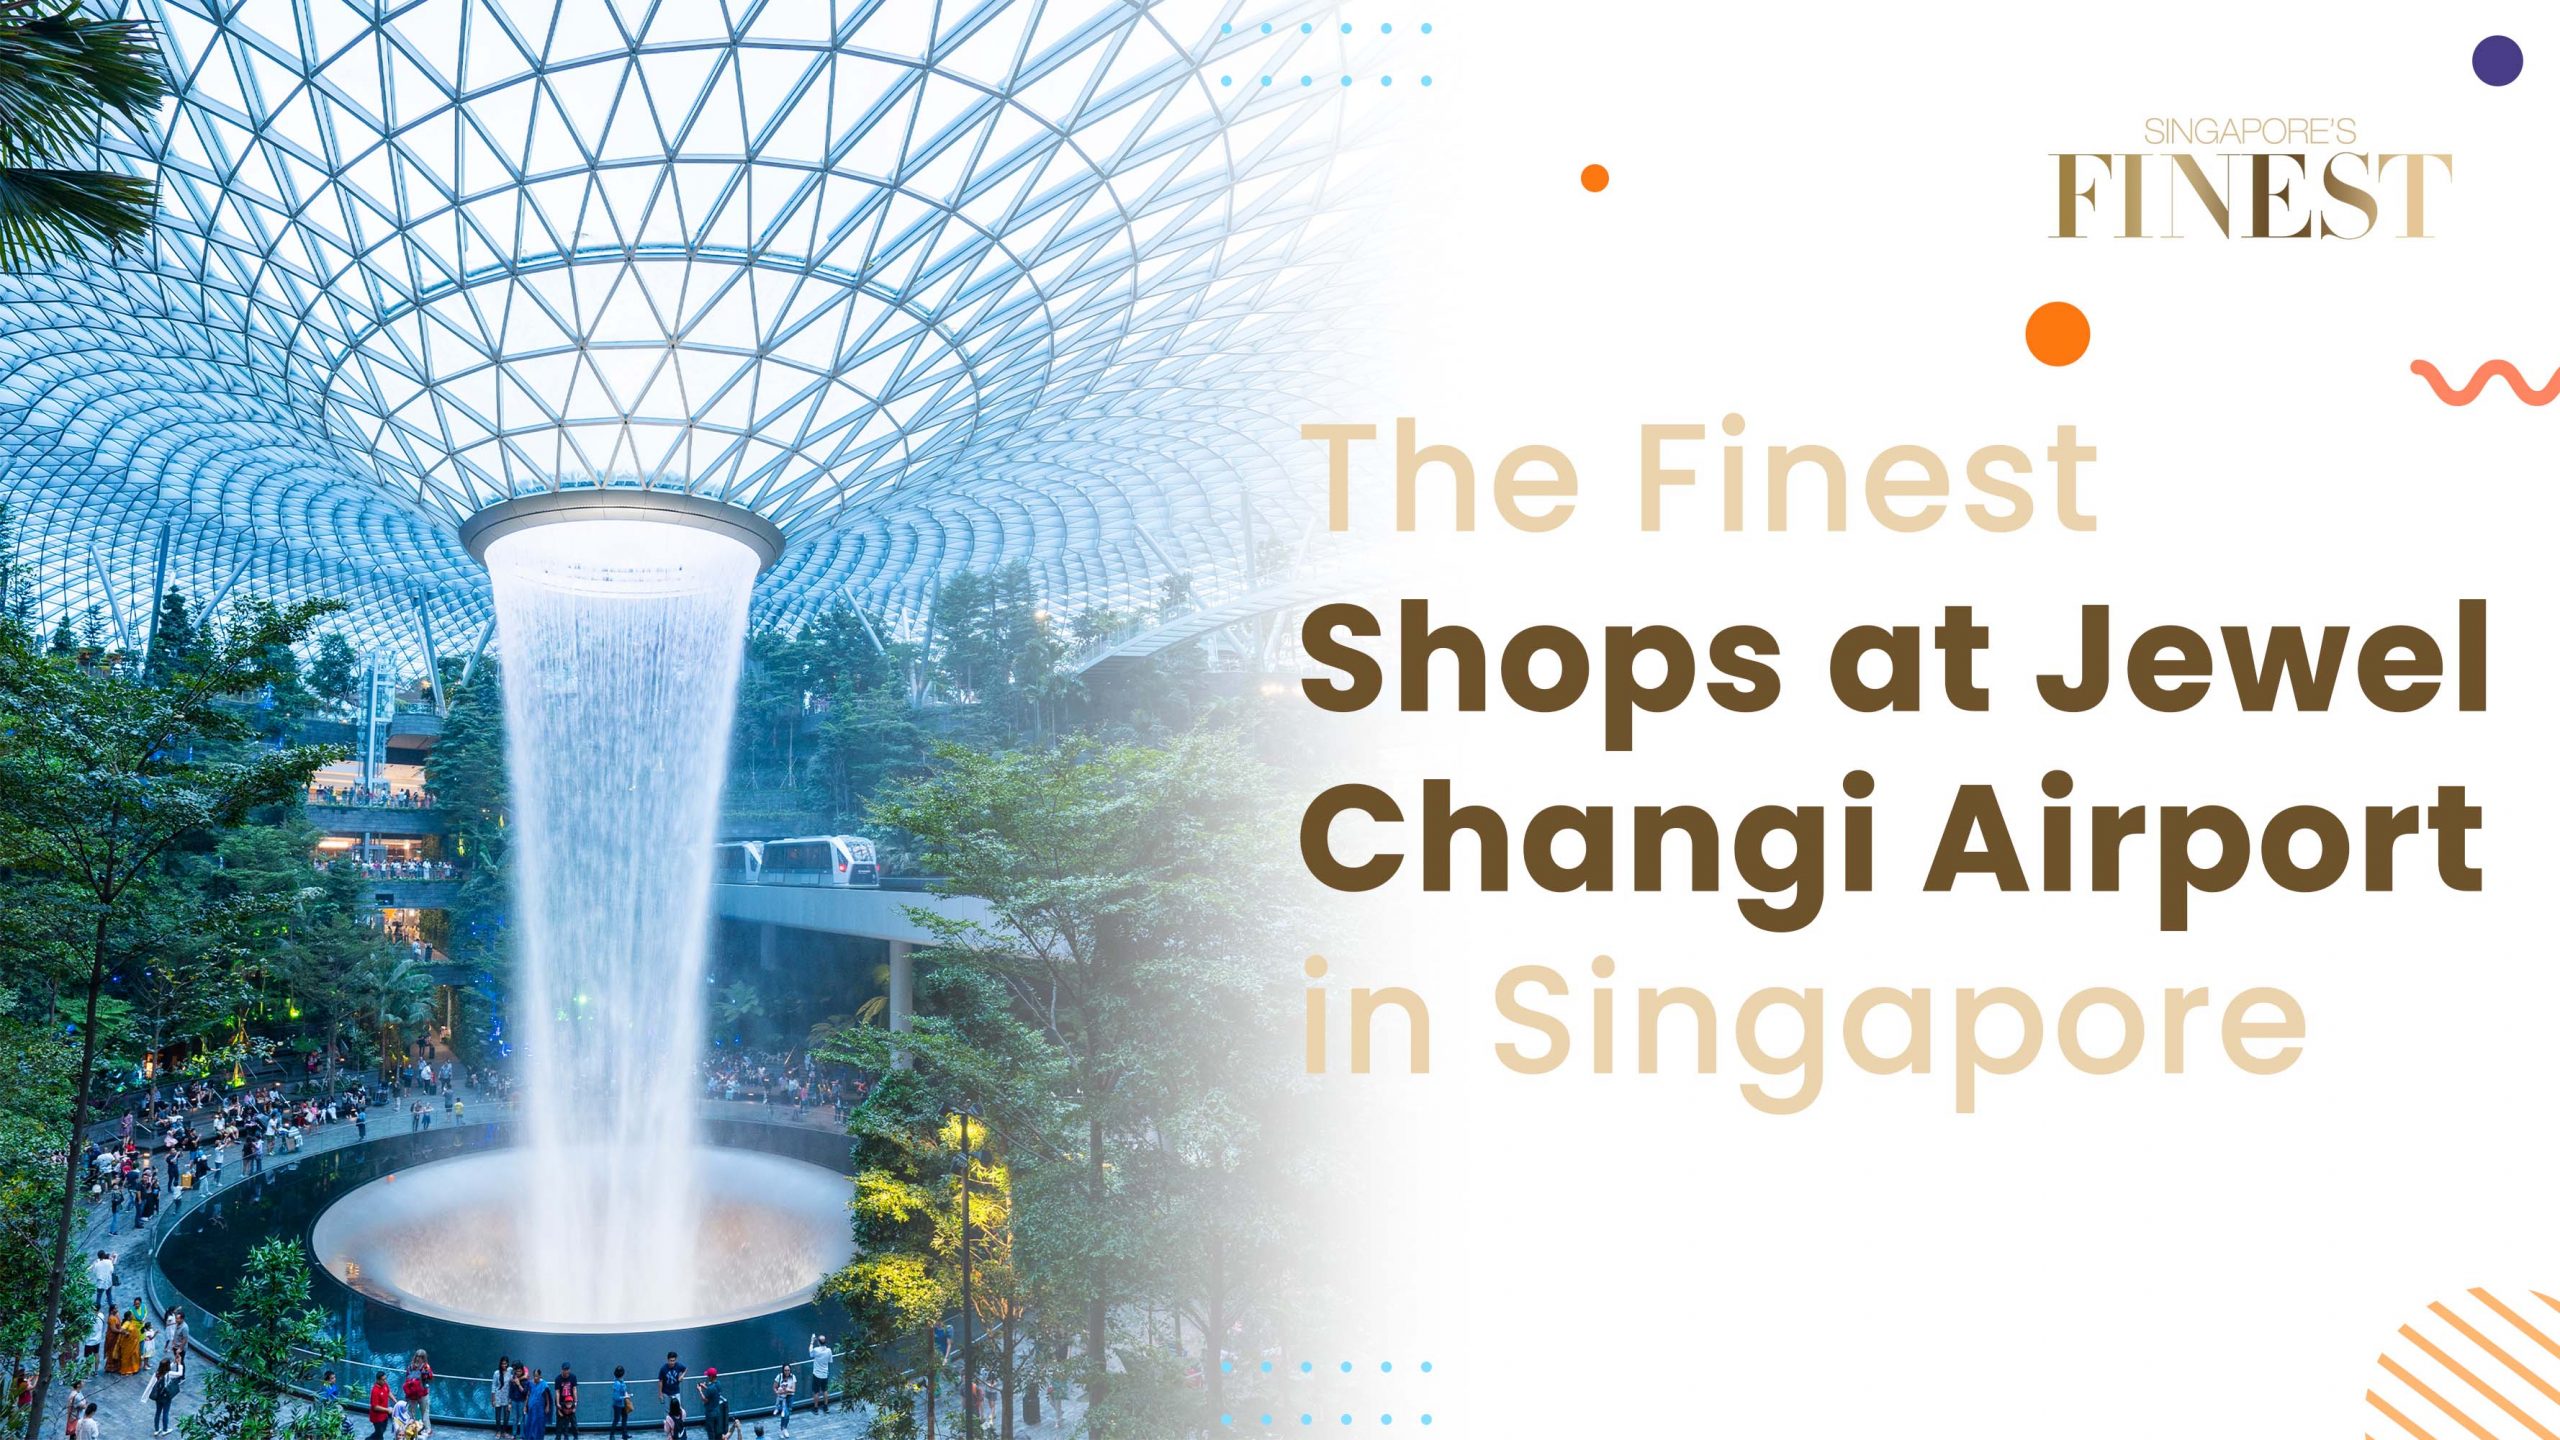 Finest Shops at Jewel Changi Airport